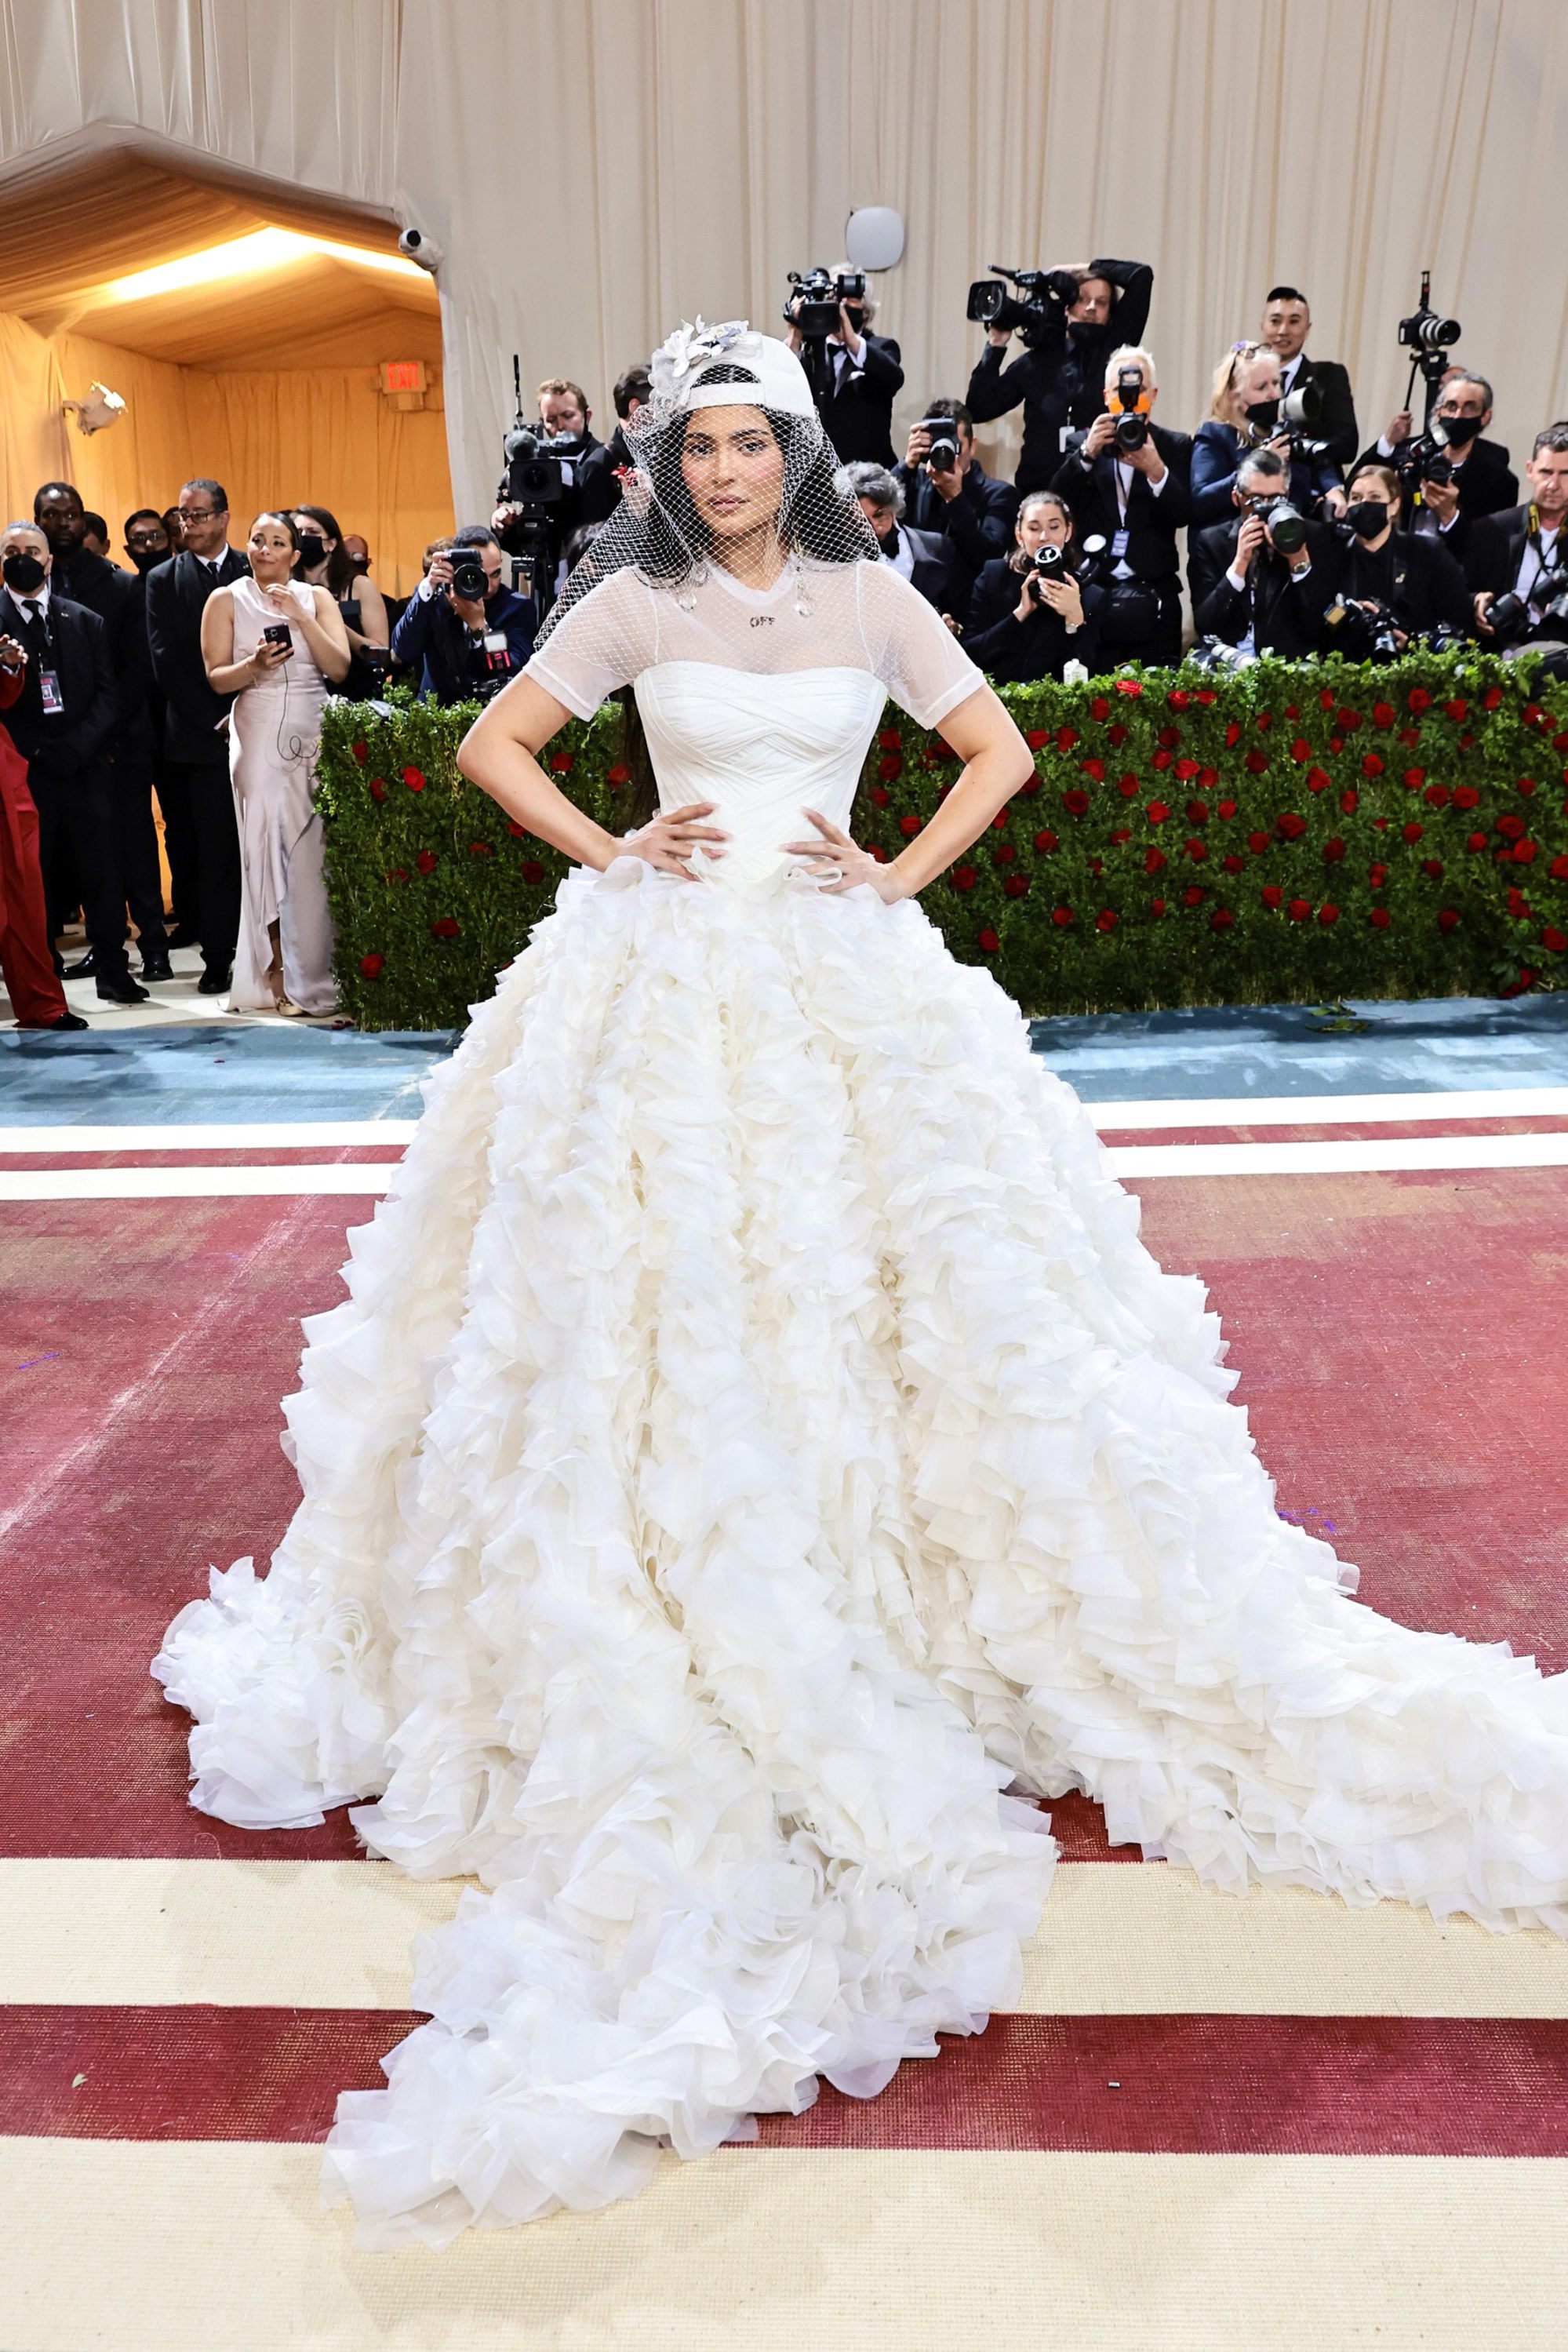 Kylie Jenner wore a ruffled white dress for her red carpet appearance. Photo: Getty Images/AFP